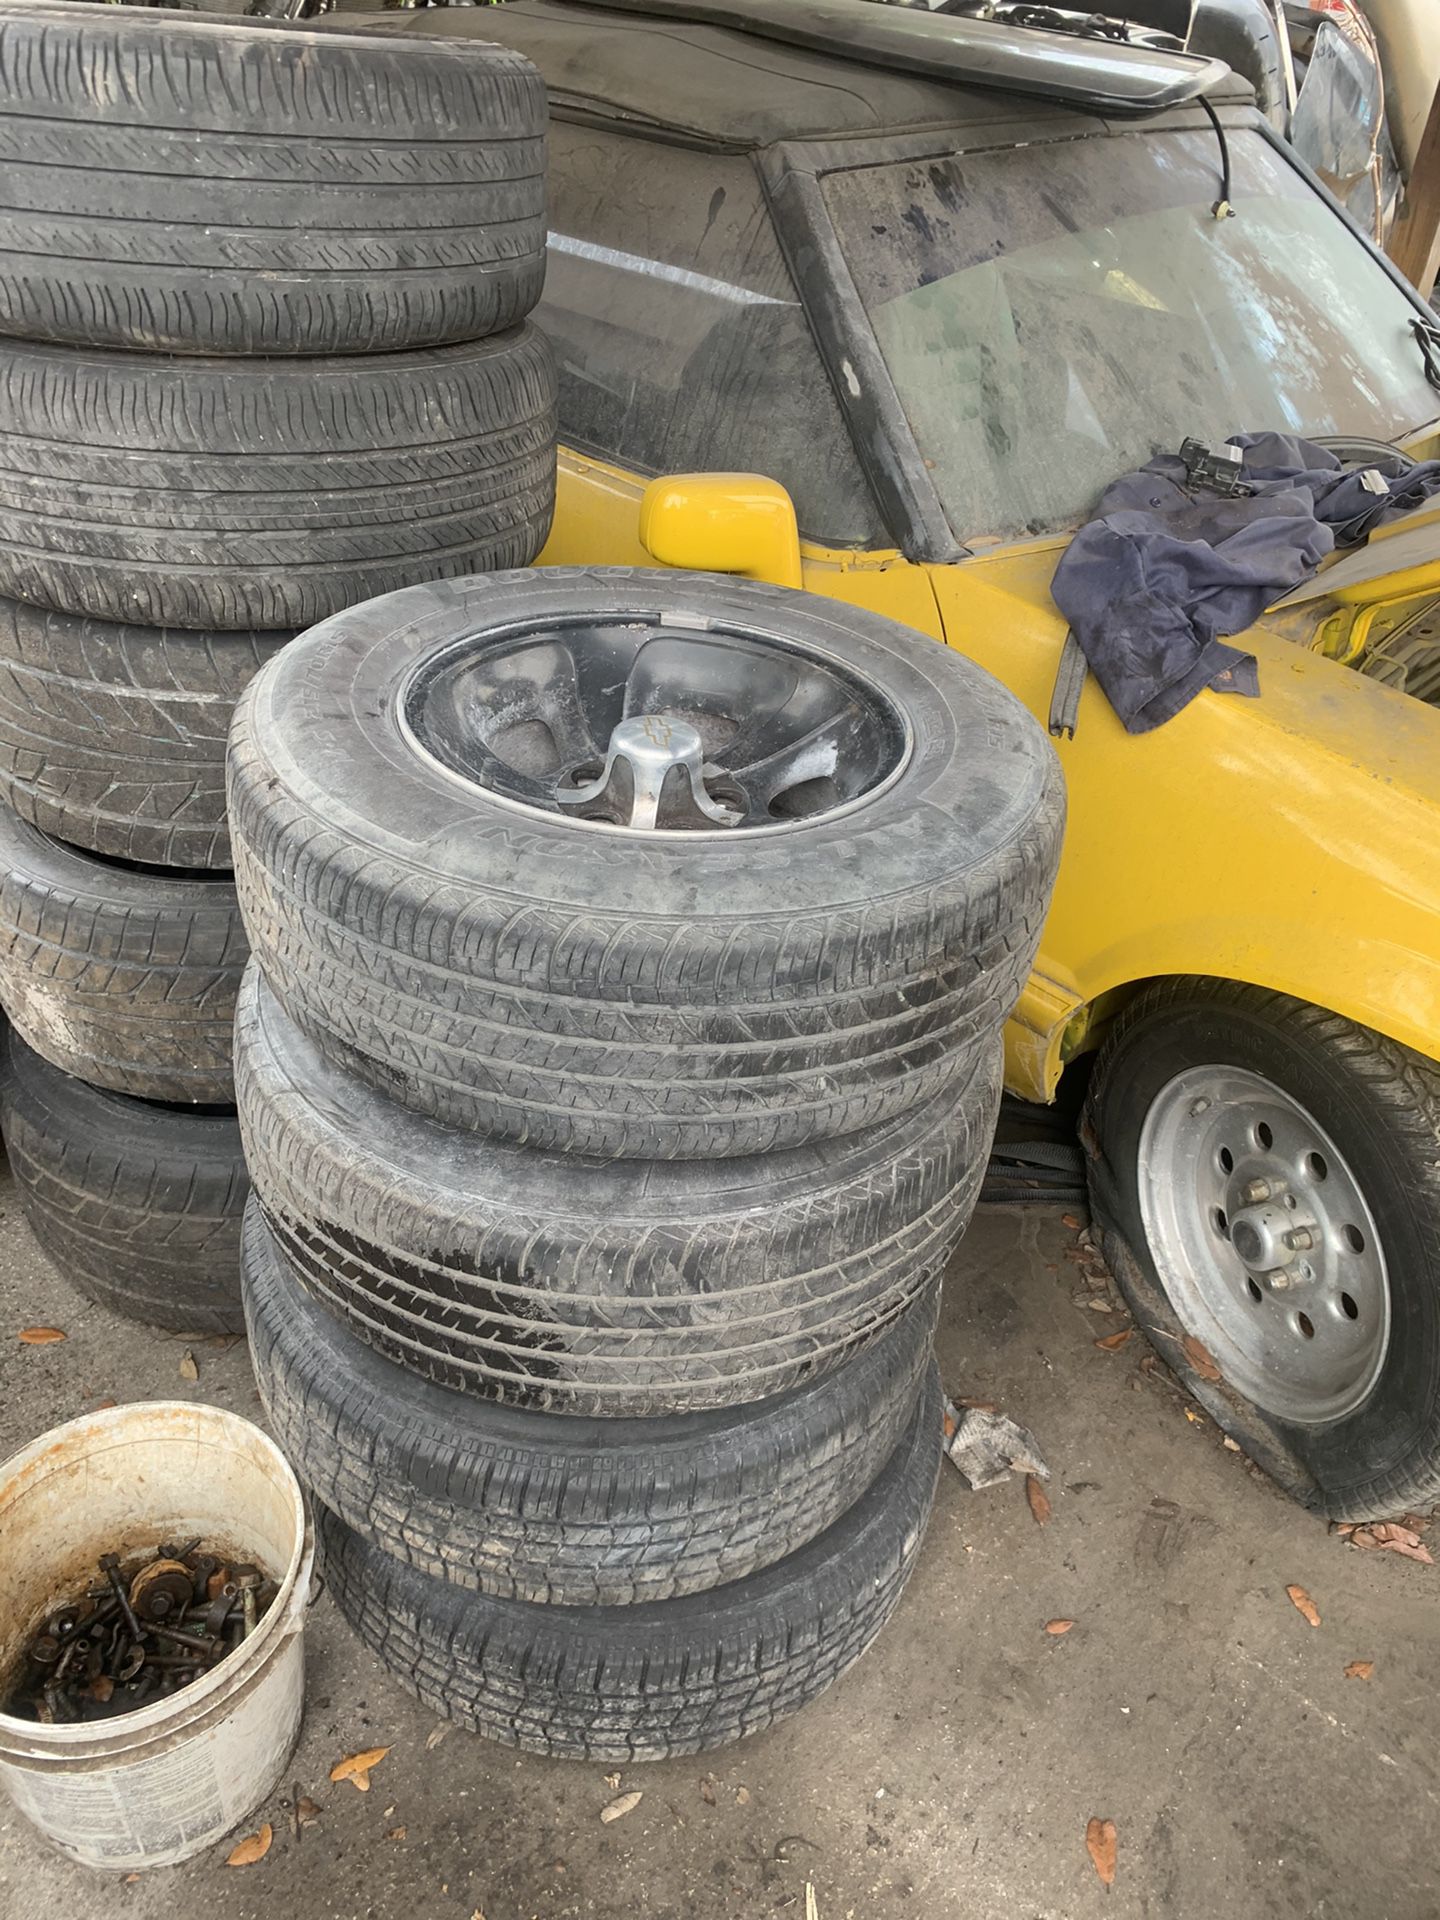 Chevy s10 rims and tires